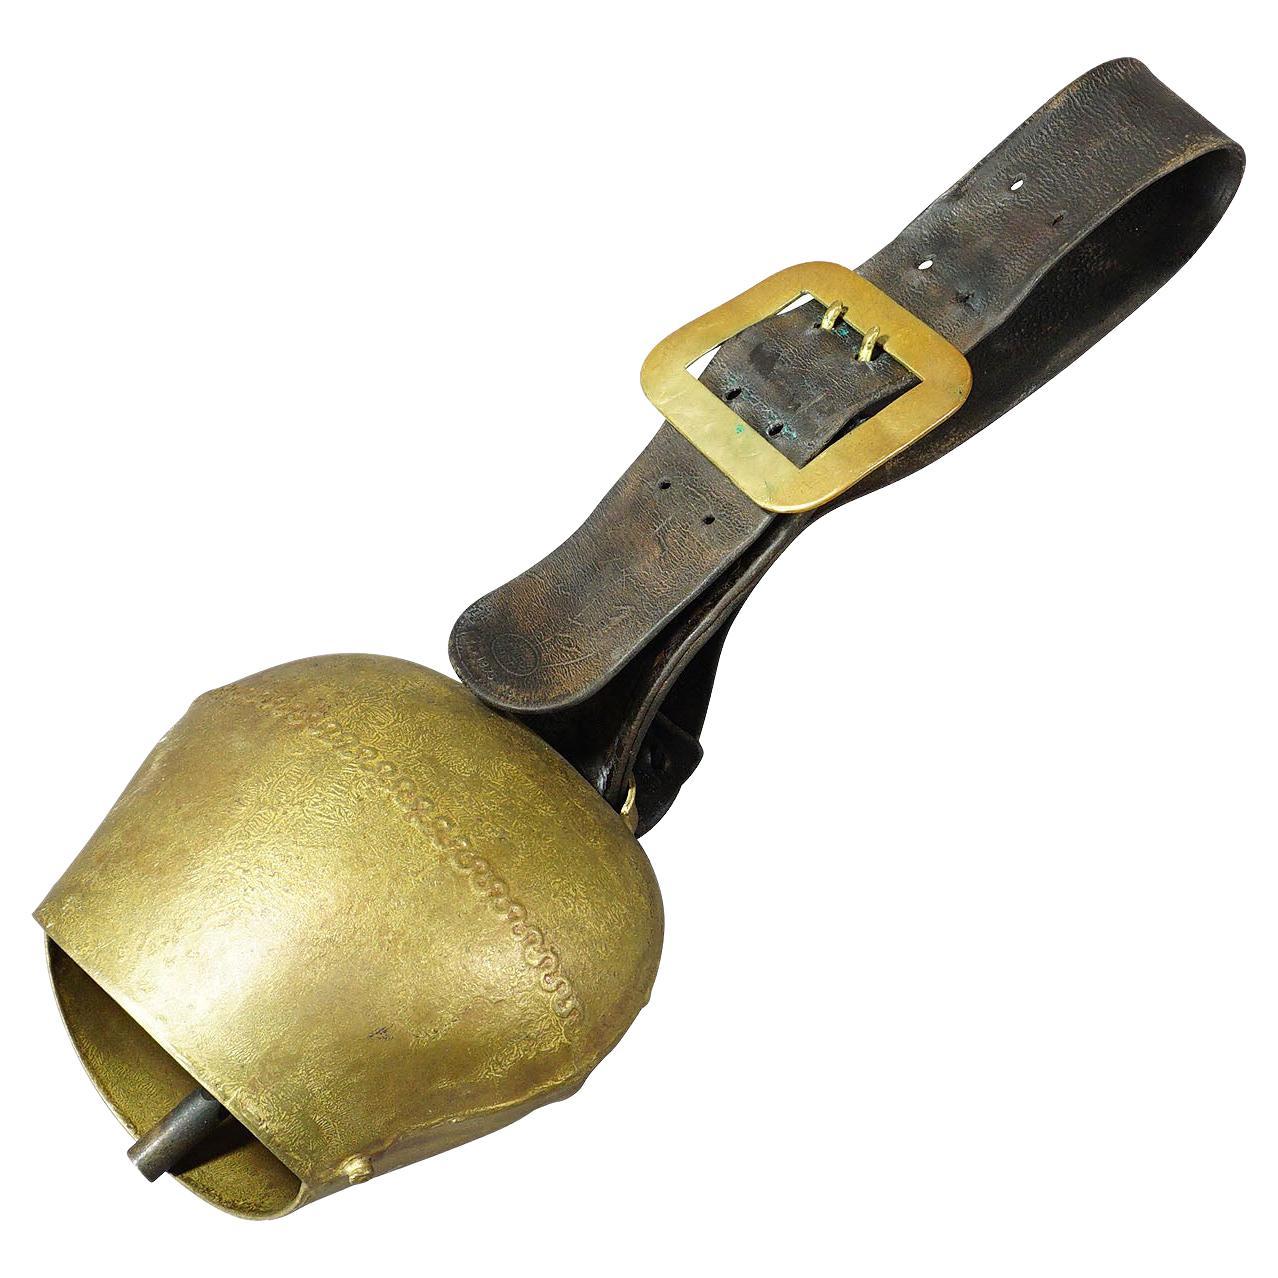 Antique Swiss Alpine Handforged Cow Bell with Leather Strap, ca. 1900